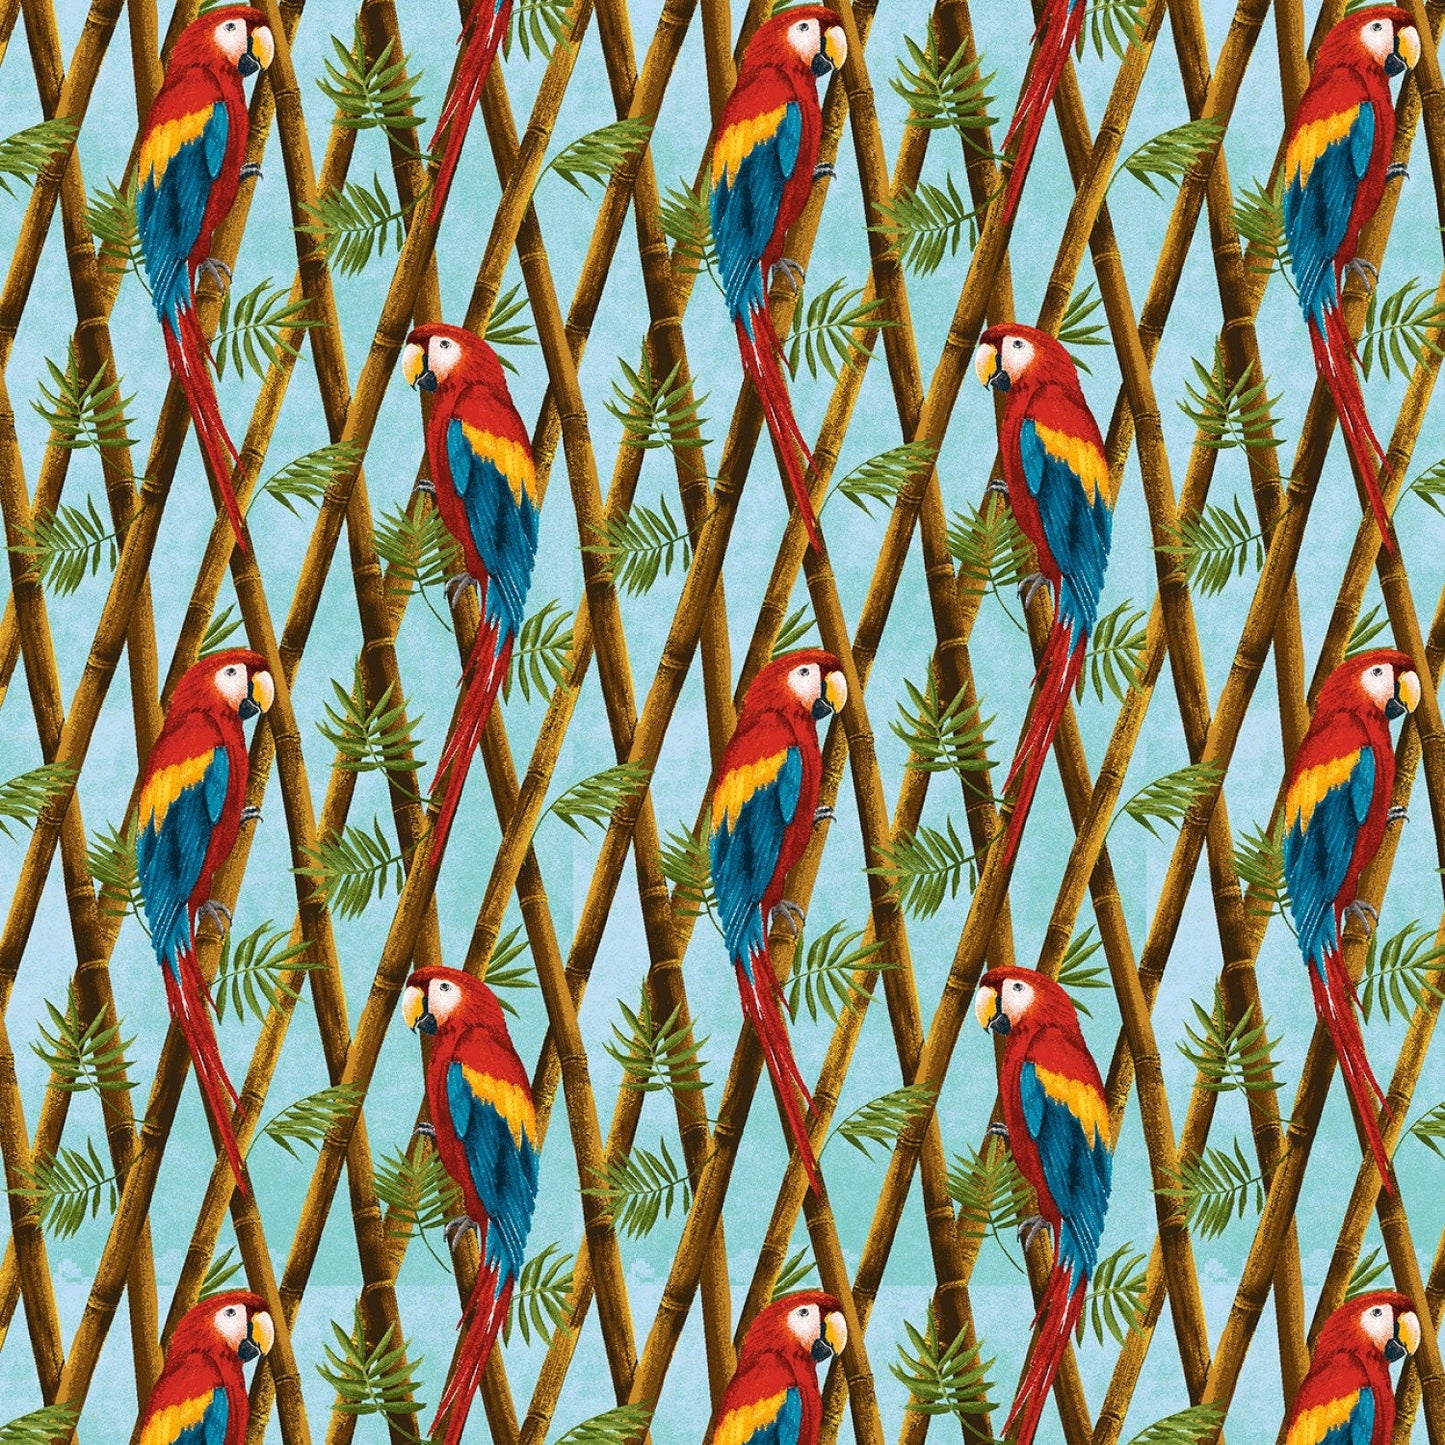 Birds in Paradise by Lisa Sparling Parrot Seated On Bamboo Sky Blue 9079-11 Cotton Woven Fabric